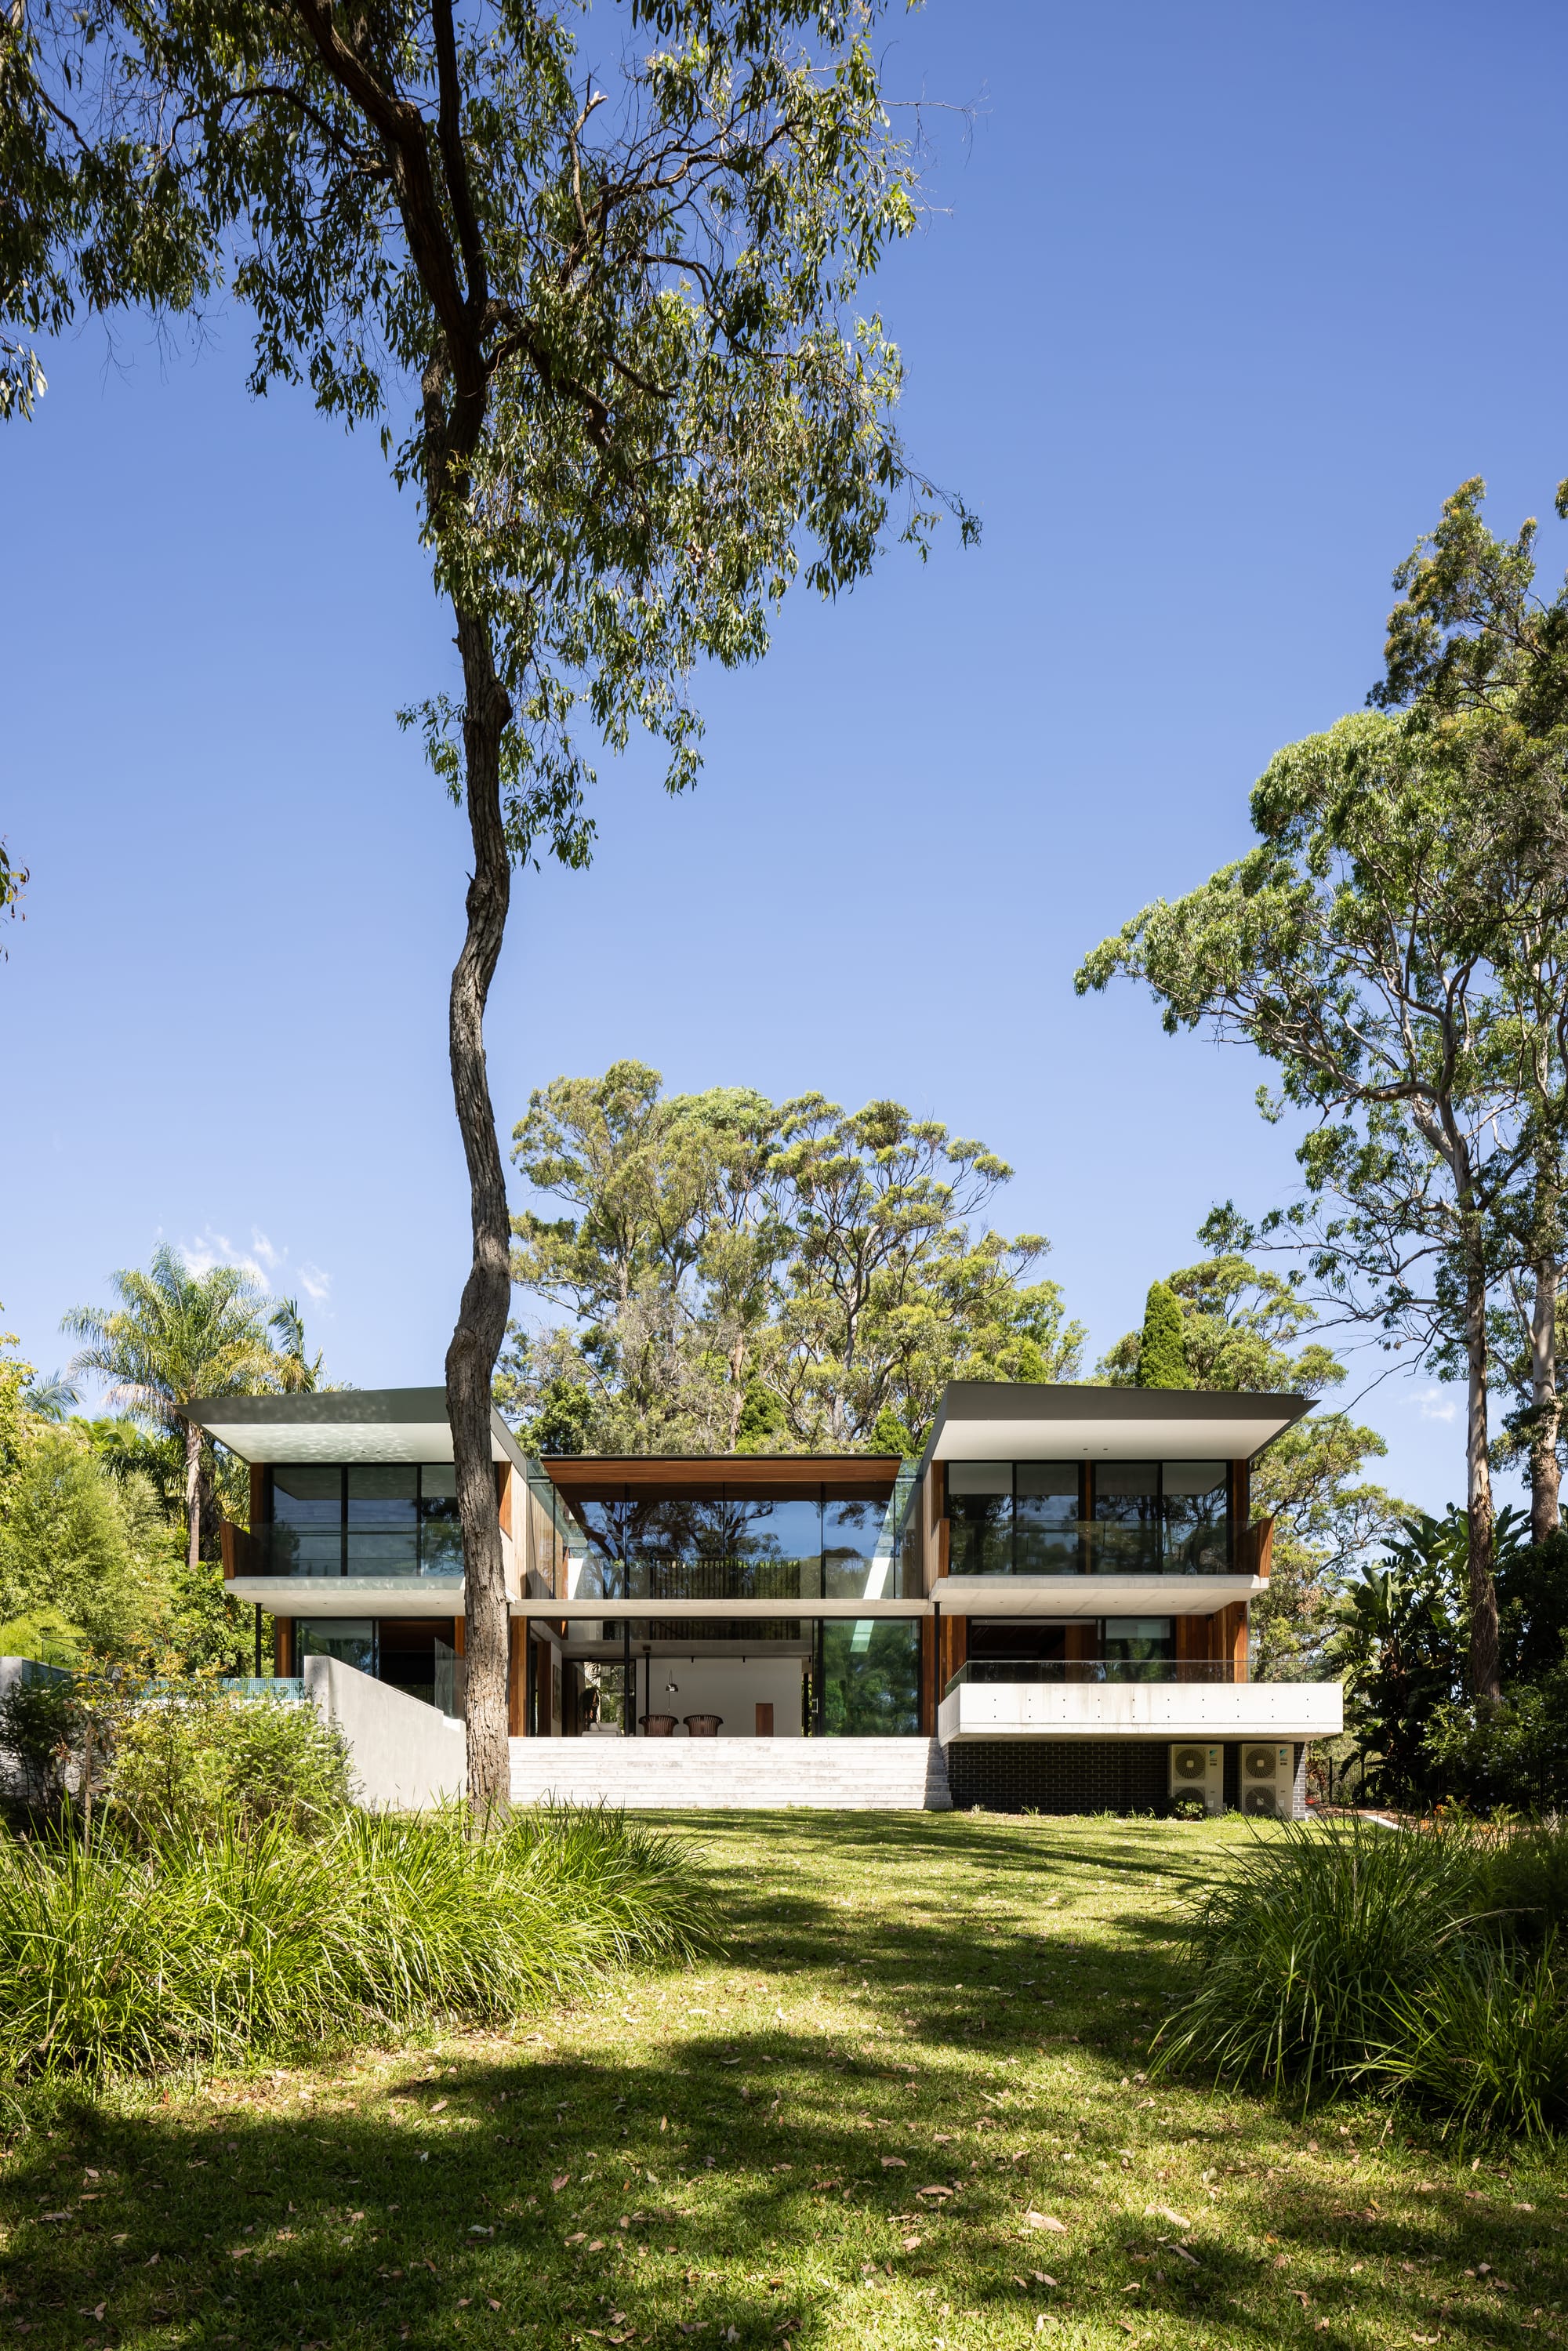 Mortlock Timbers Series: Fox Valley House. Photography by Simon Whitbread. Rear facade of double storey home with symmetrical wings. Green and grassy native plants in backyard. 